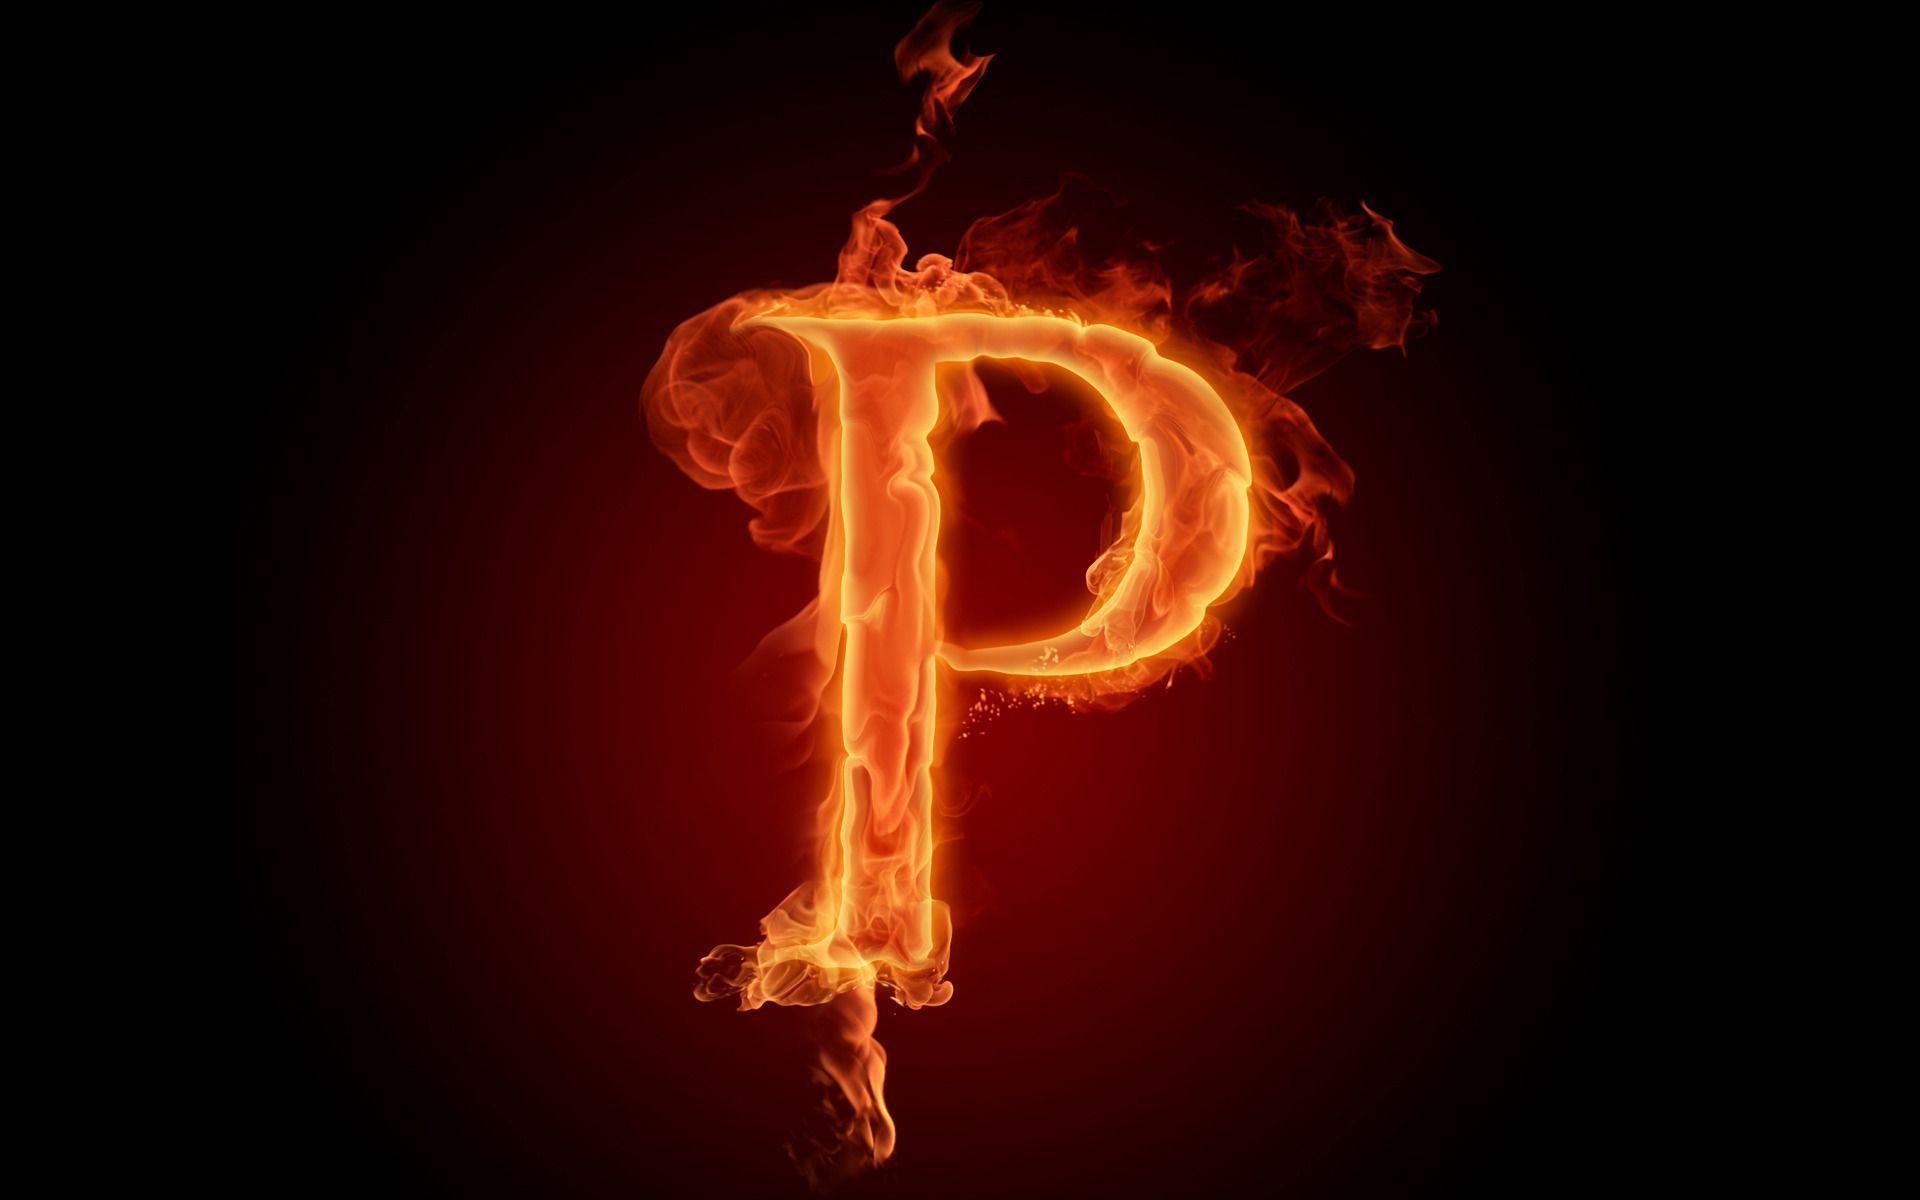 The fiery English alphabet picture P Wallpaper Wallpaper 73630